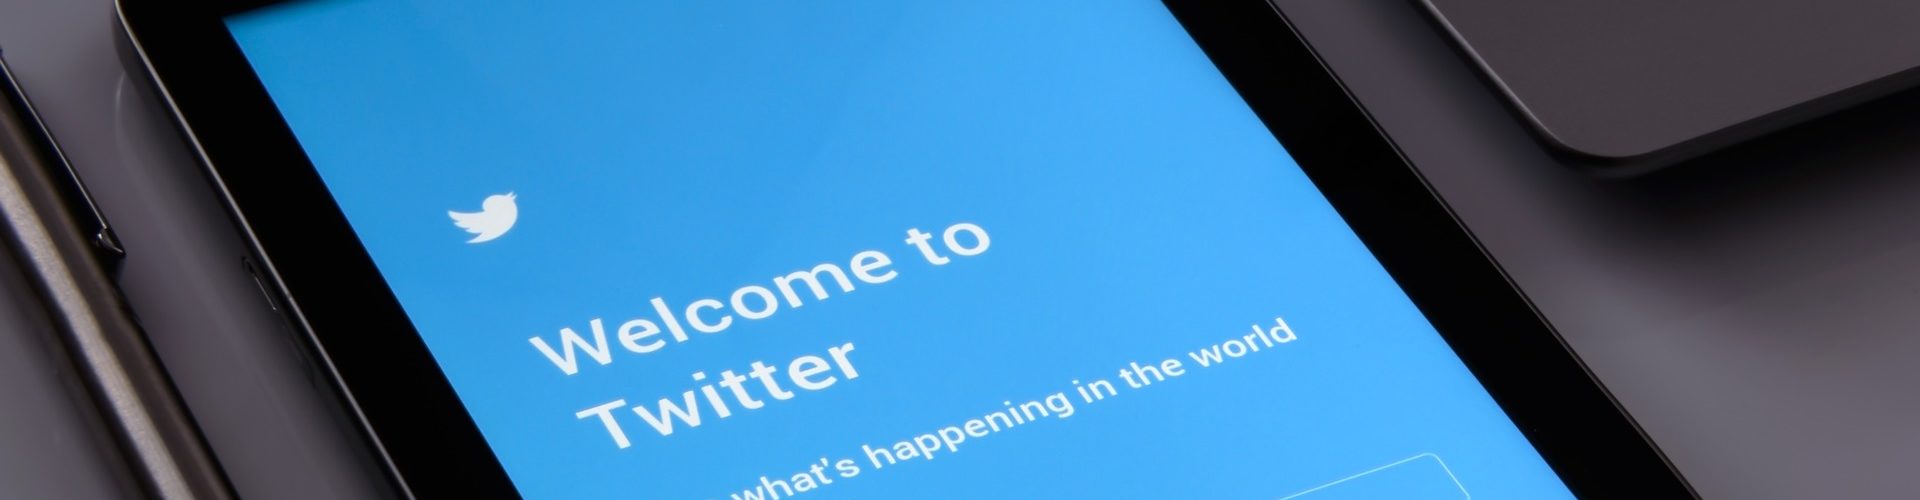 Key steps for a healthier Twitter revealed